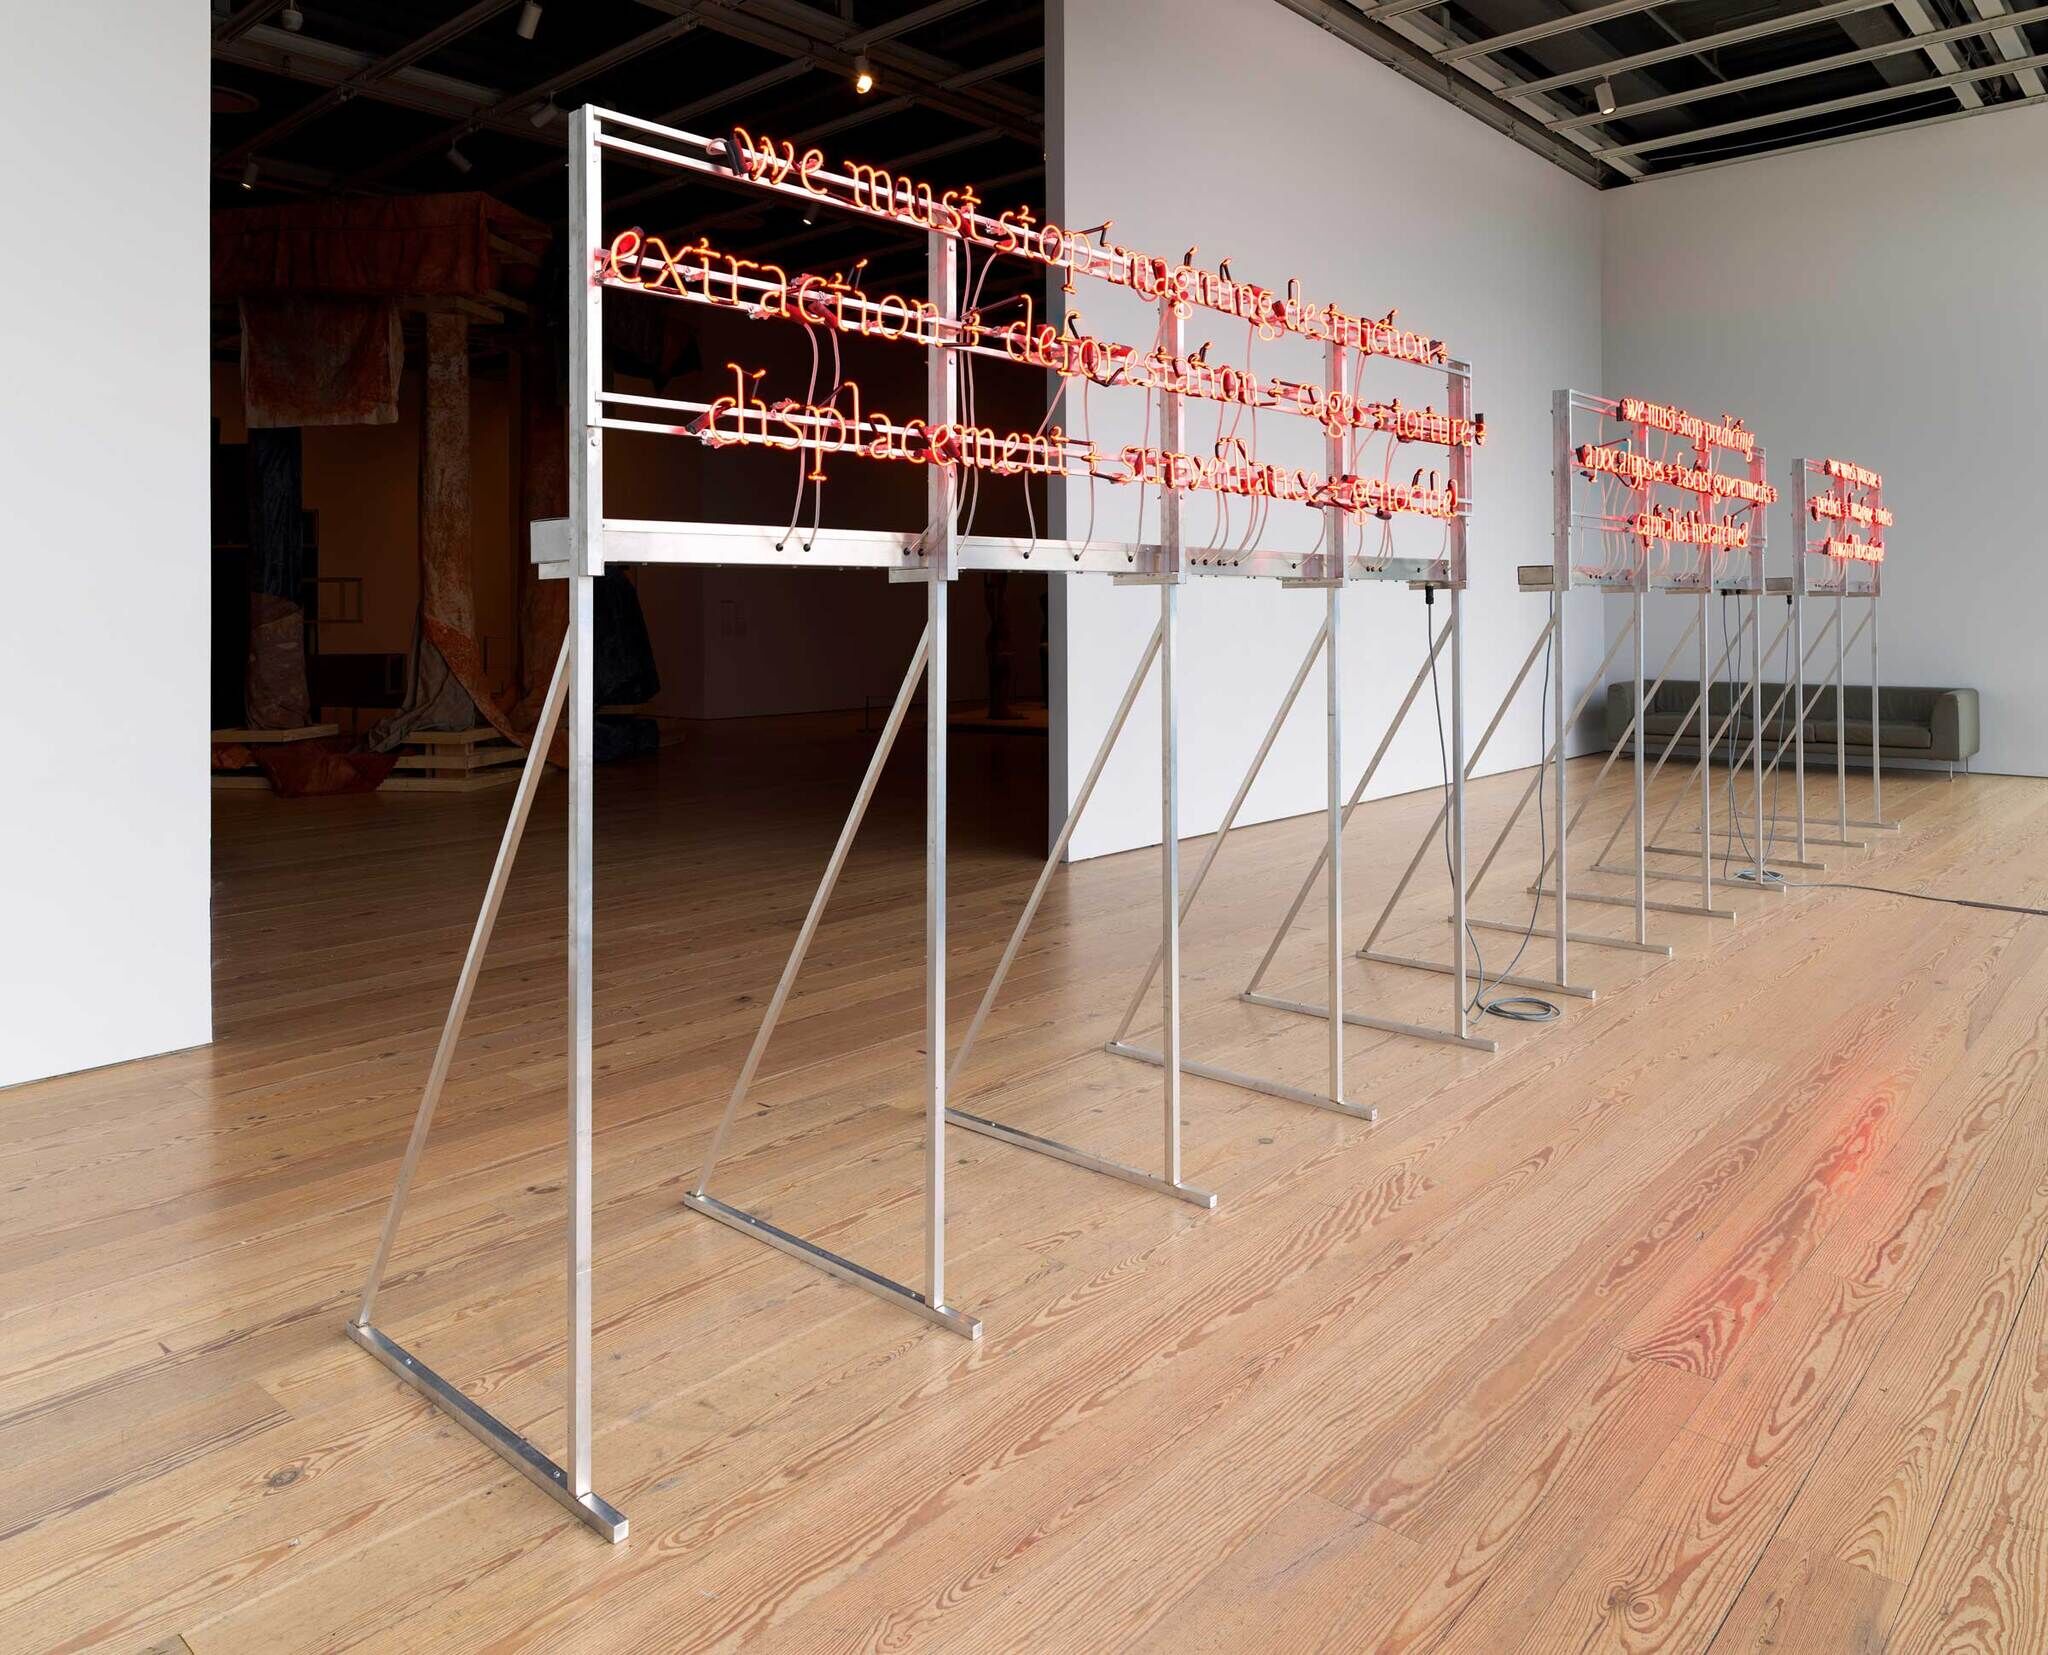 Neon light installation with text on metal stands in an art gallery, wooden floors, and abstract art in the background.